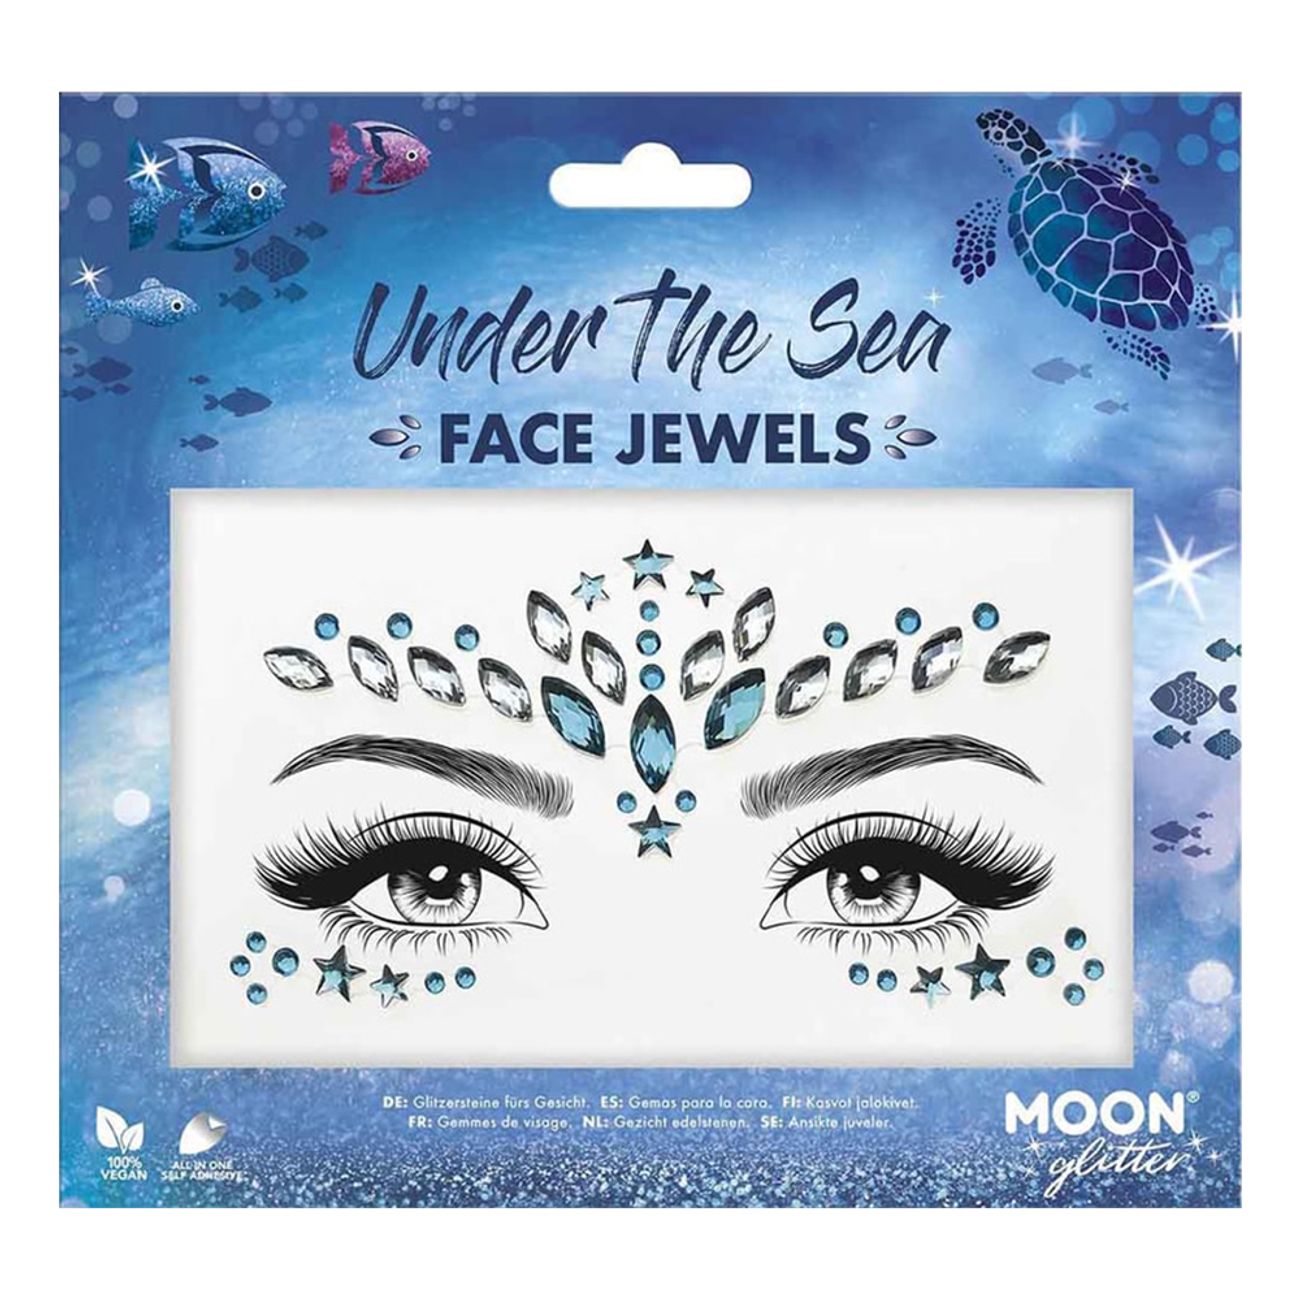 face-jewels-under-the-sea-98342-1